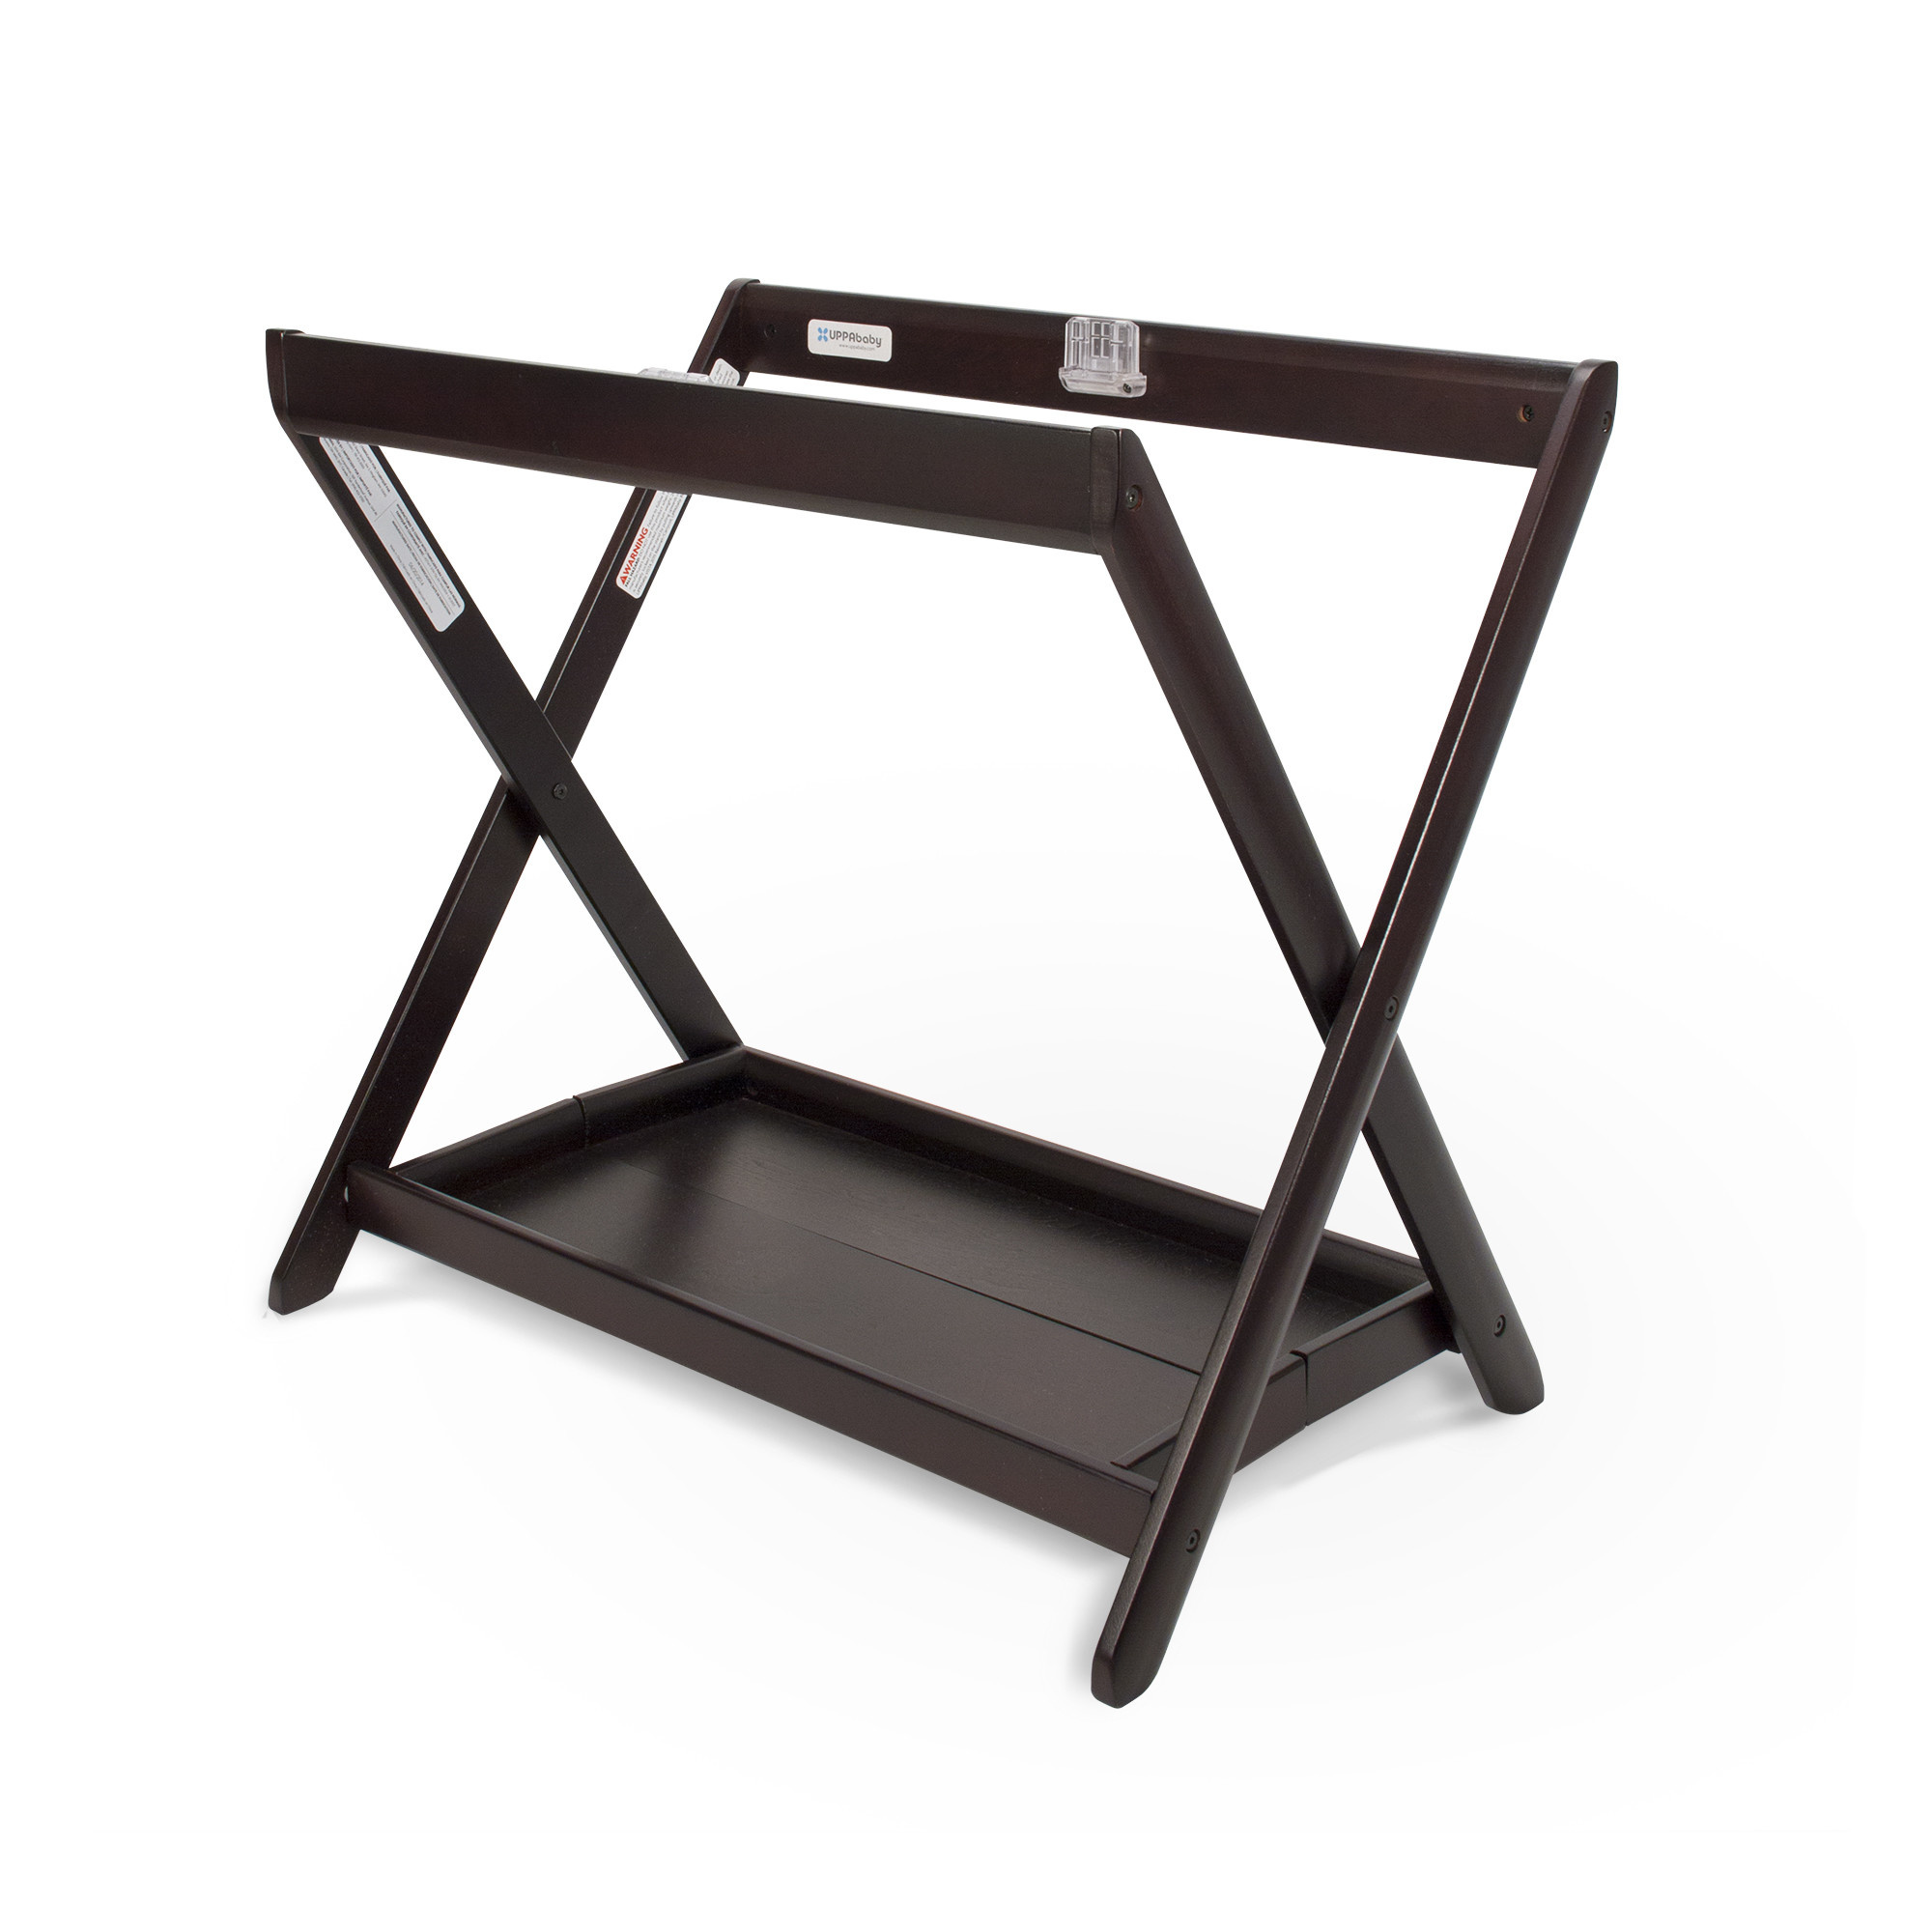 UPPAbaby UPPAbaby Bassinet Stand